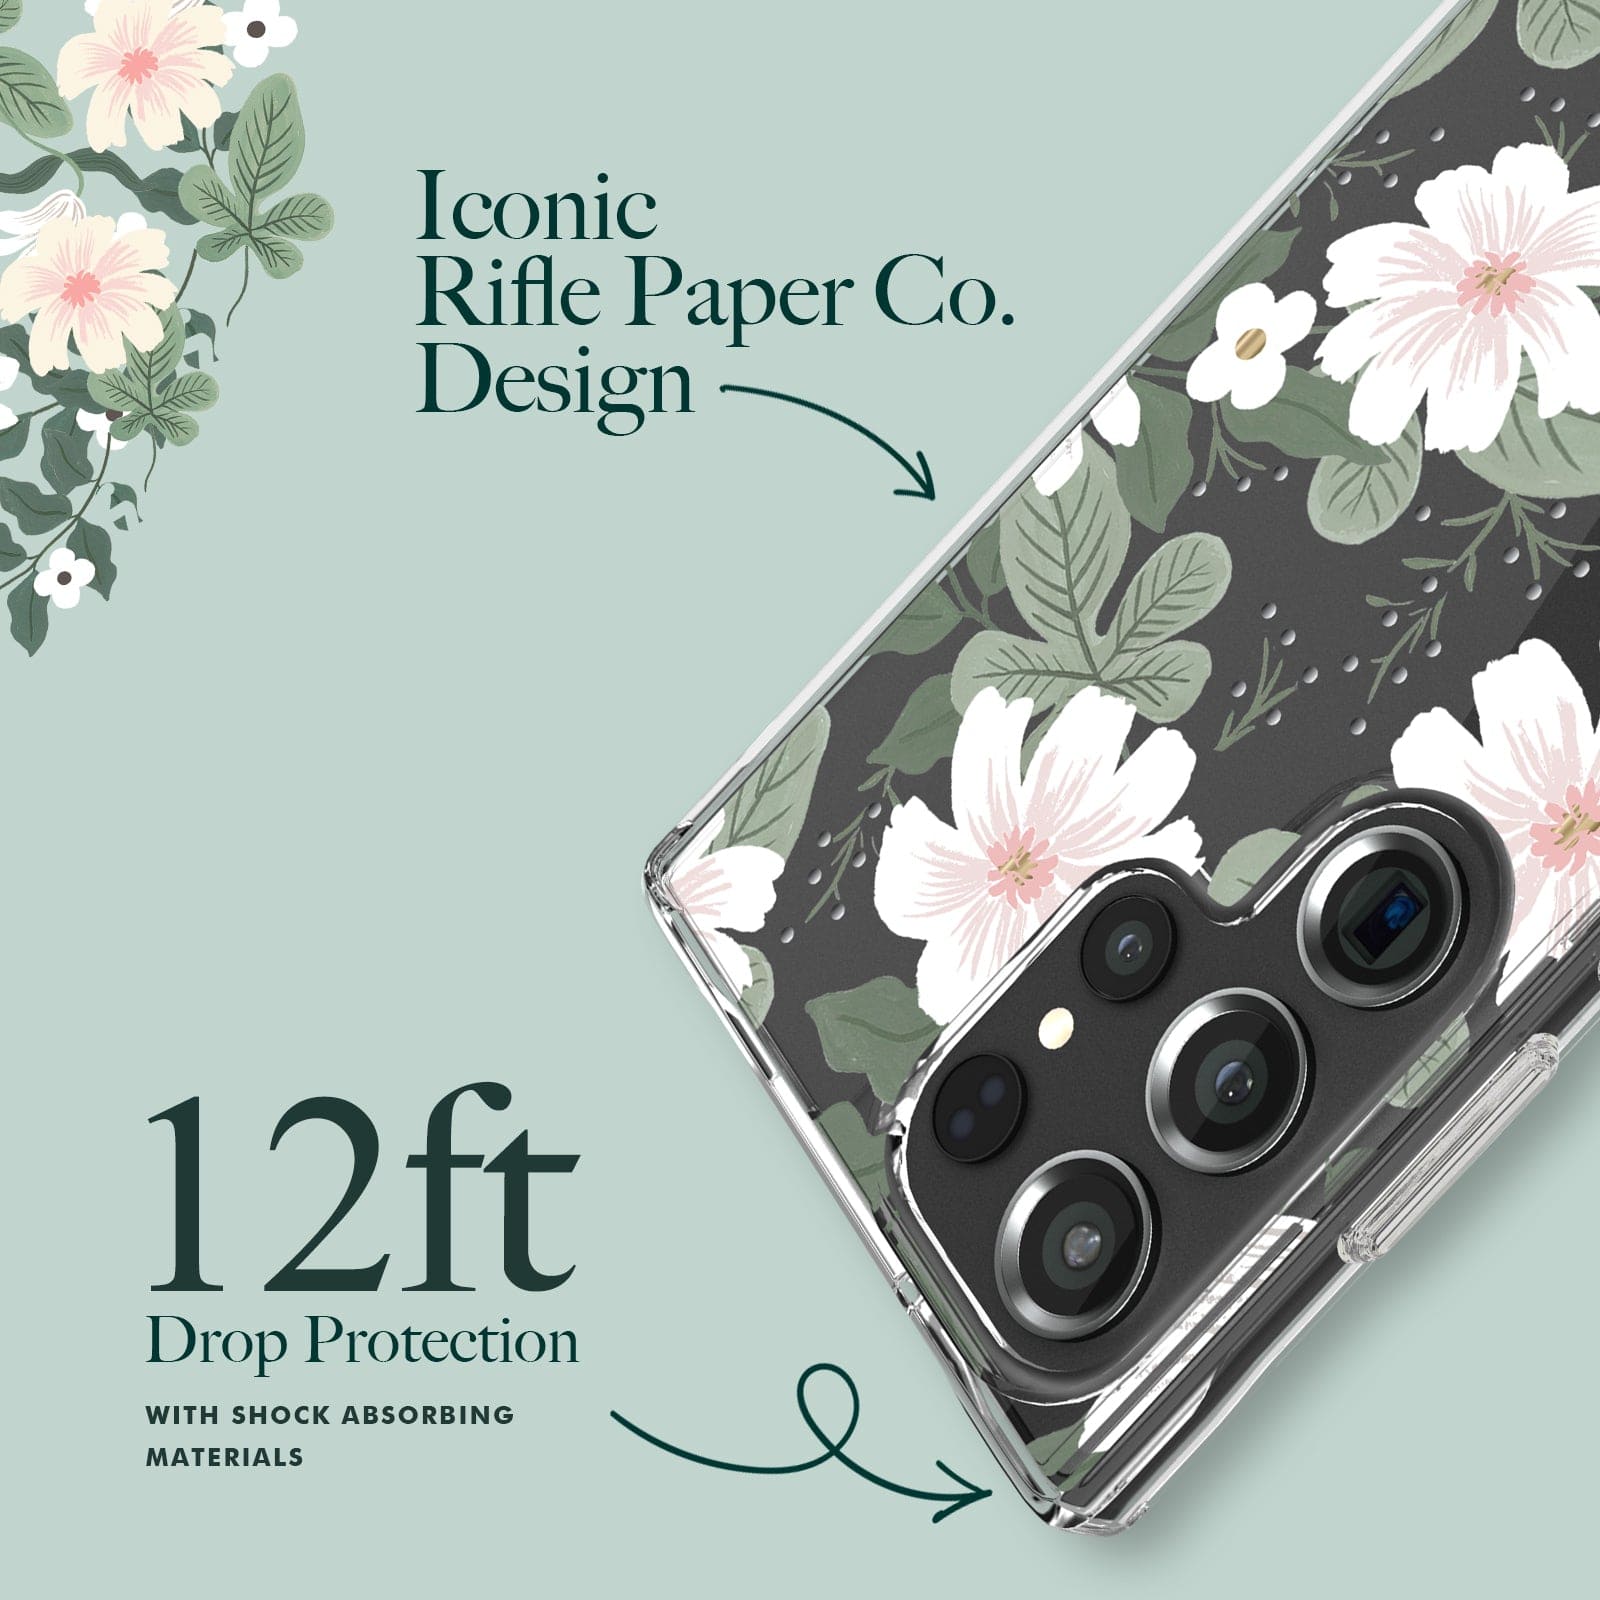 ICONIC RIFLE PAPER CO. DESIGN. 12 FT DROP PROTECTION WITH SHOCK ABSORBING MATERIALS.